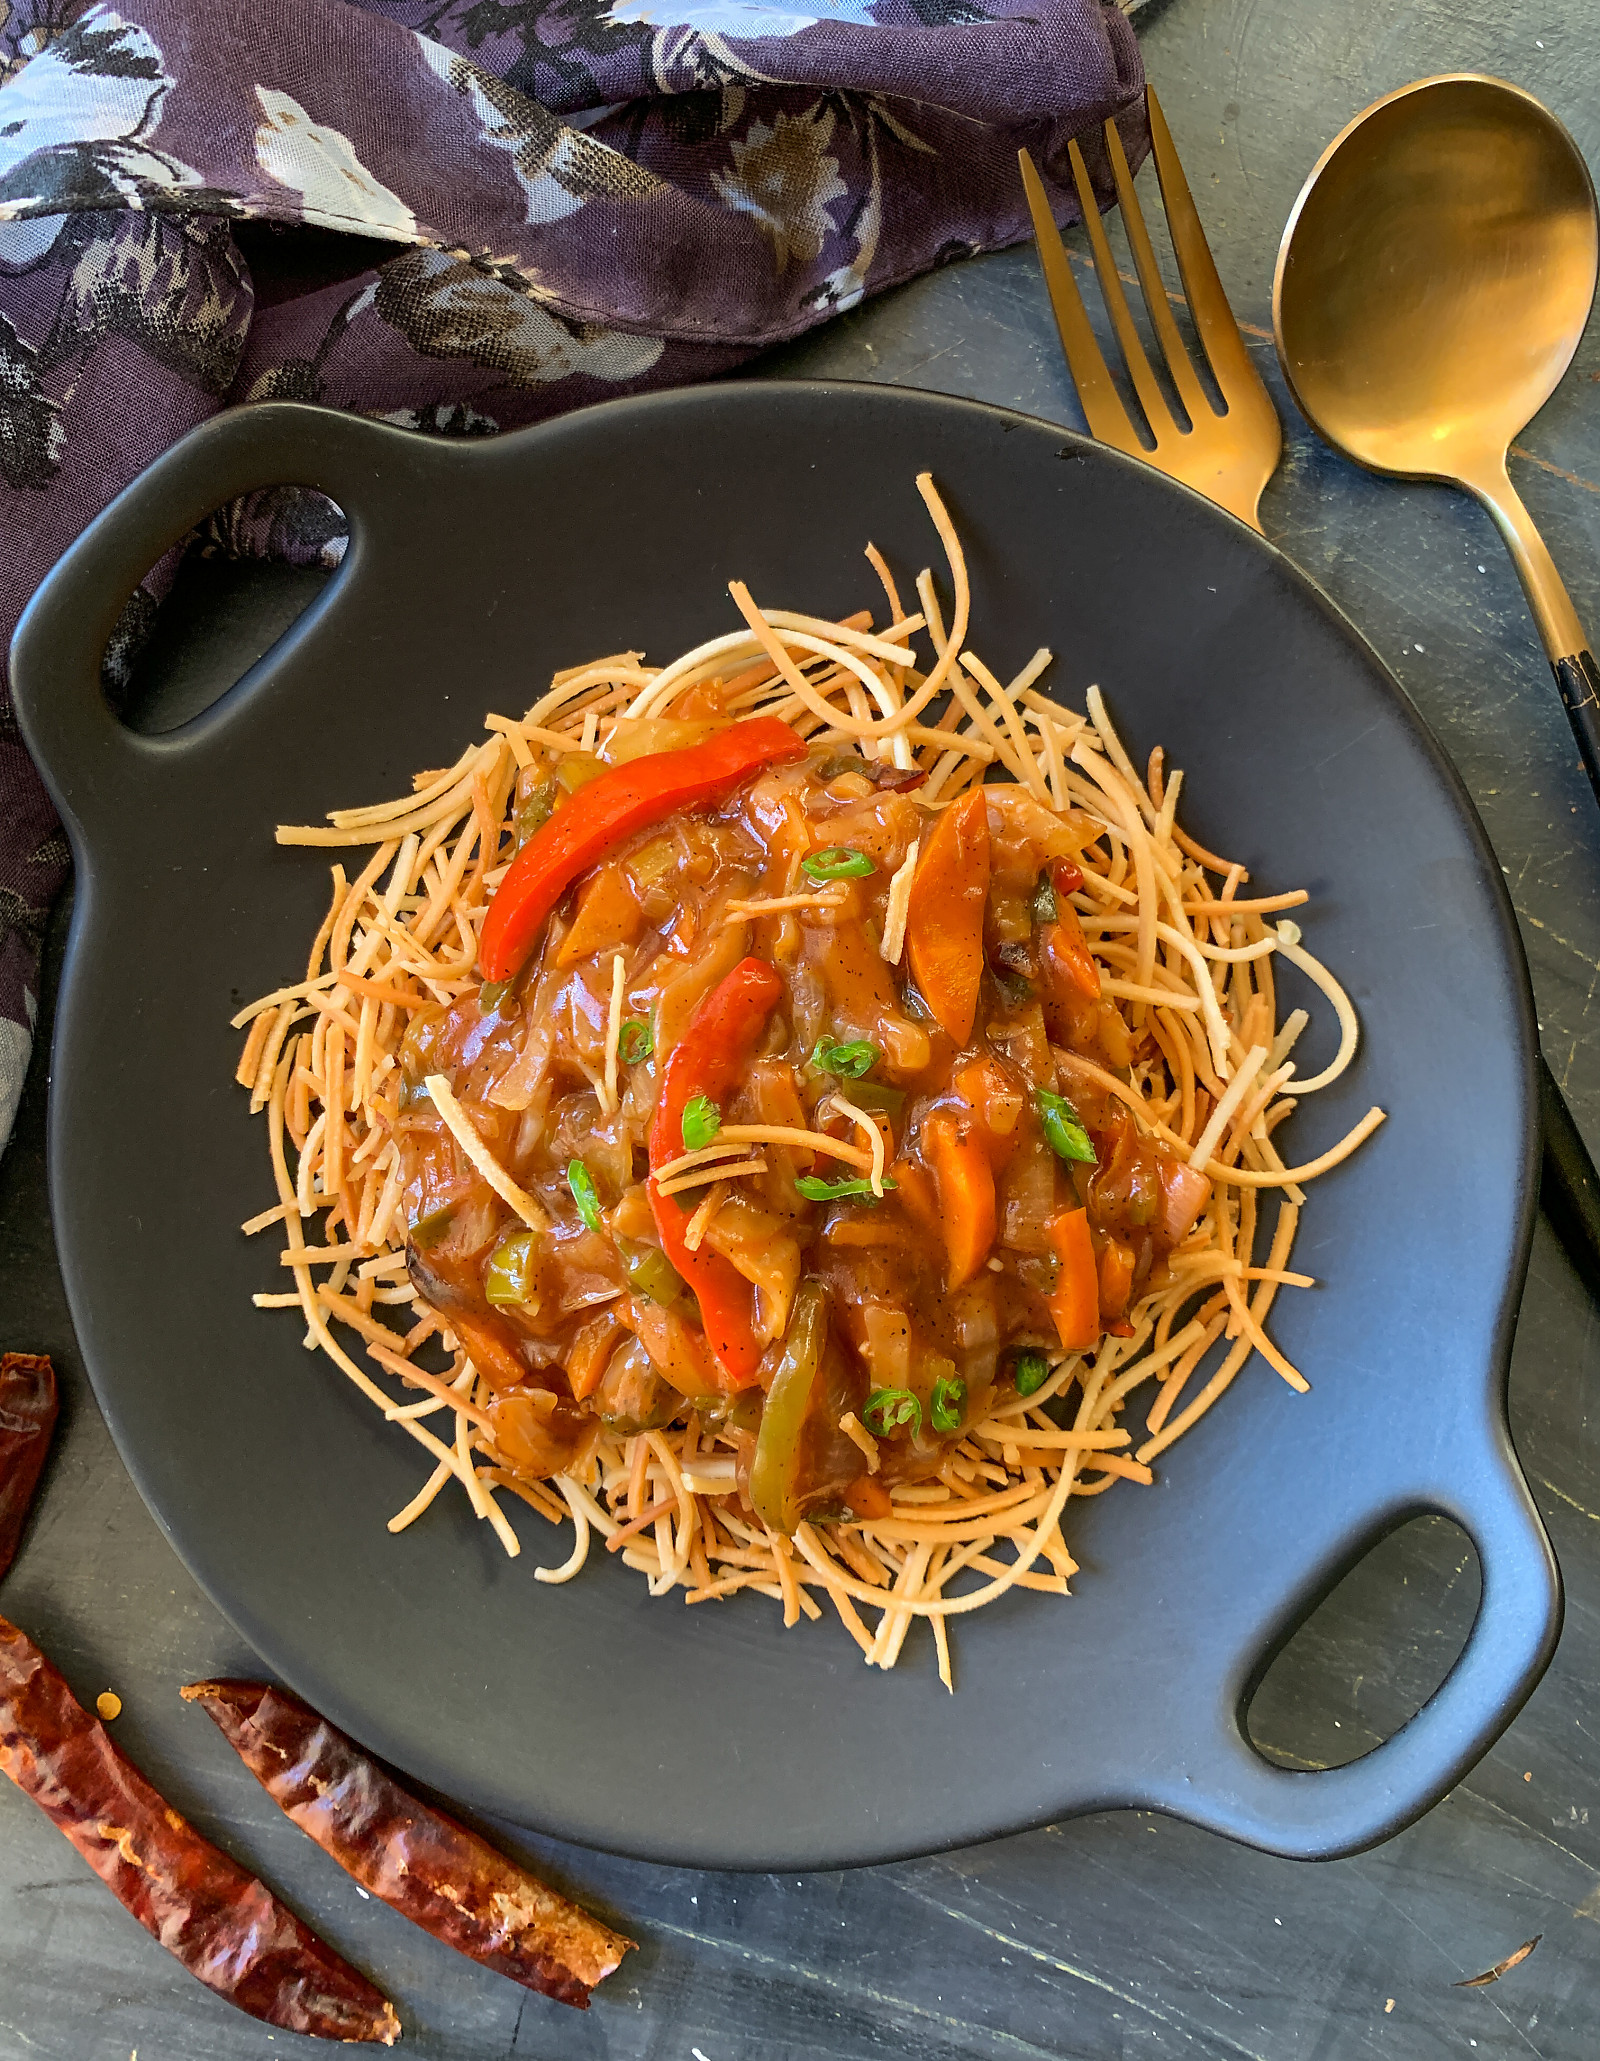 American Chop Suey Recipe - Crispy Noodles Topped With Sweet and Sour ...